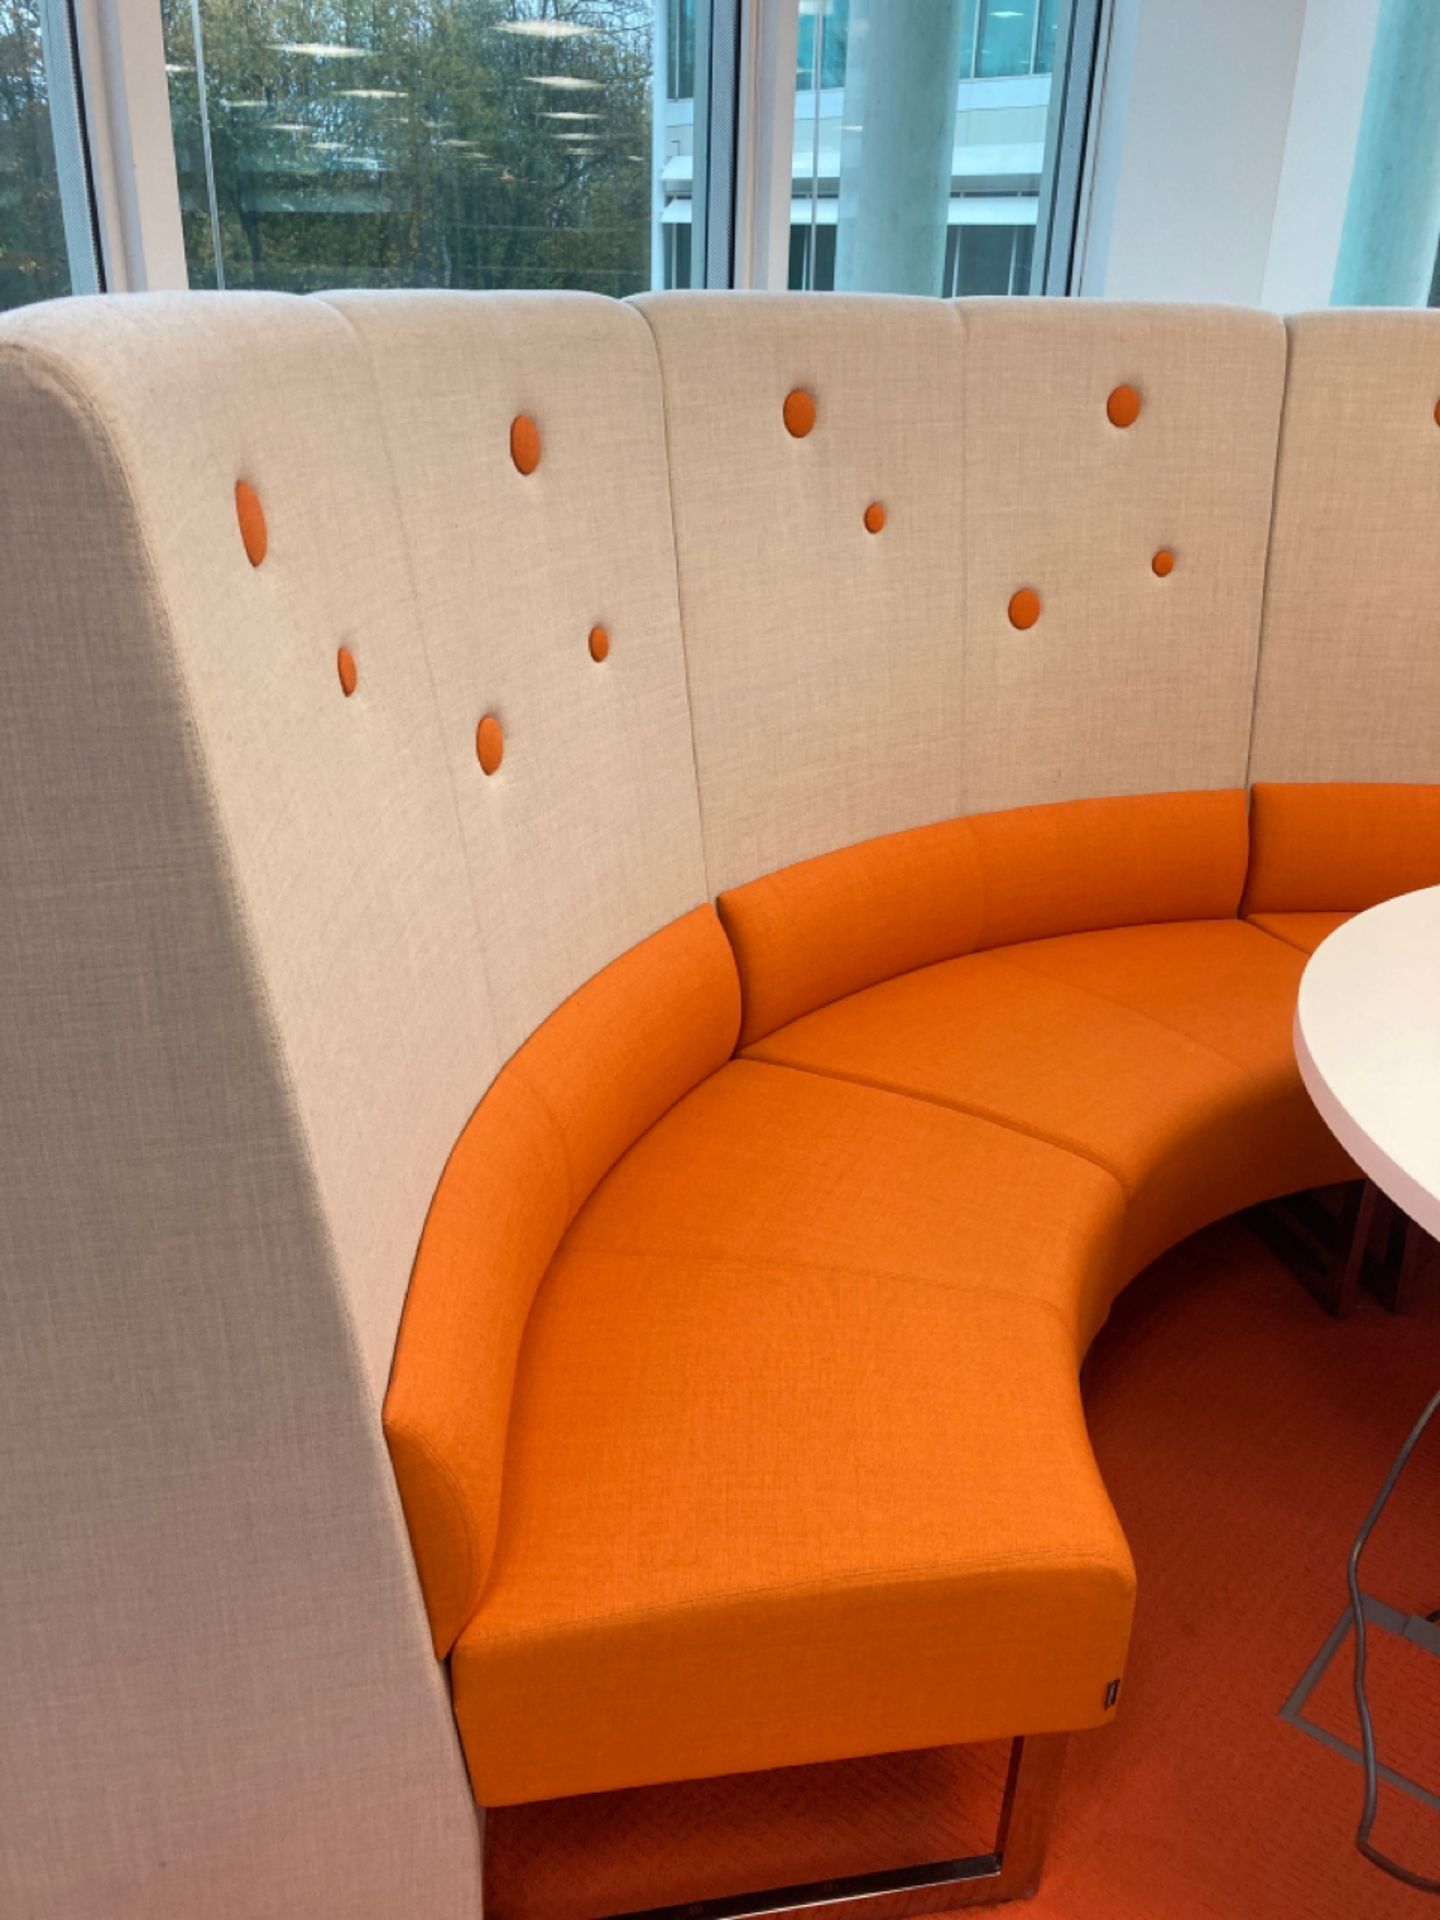 Large Fabric Circular Seating Bench With Table - Image 2 of 4